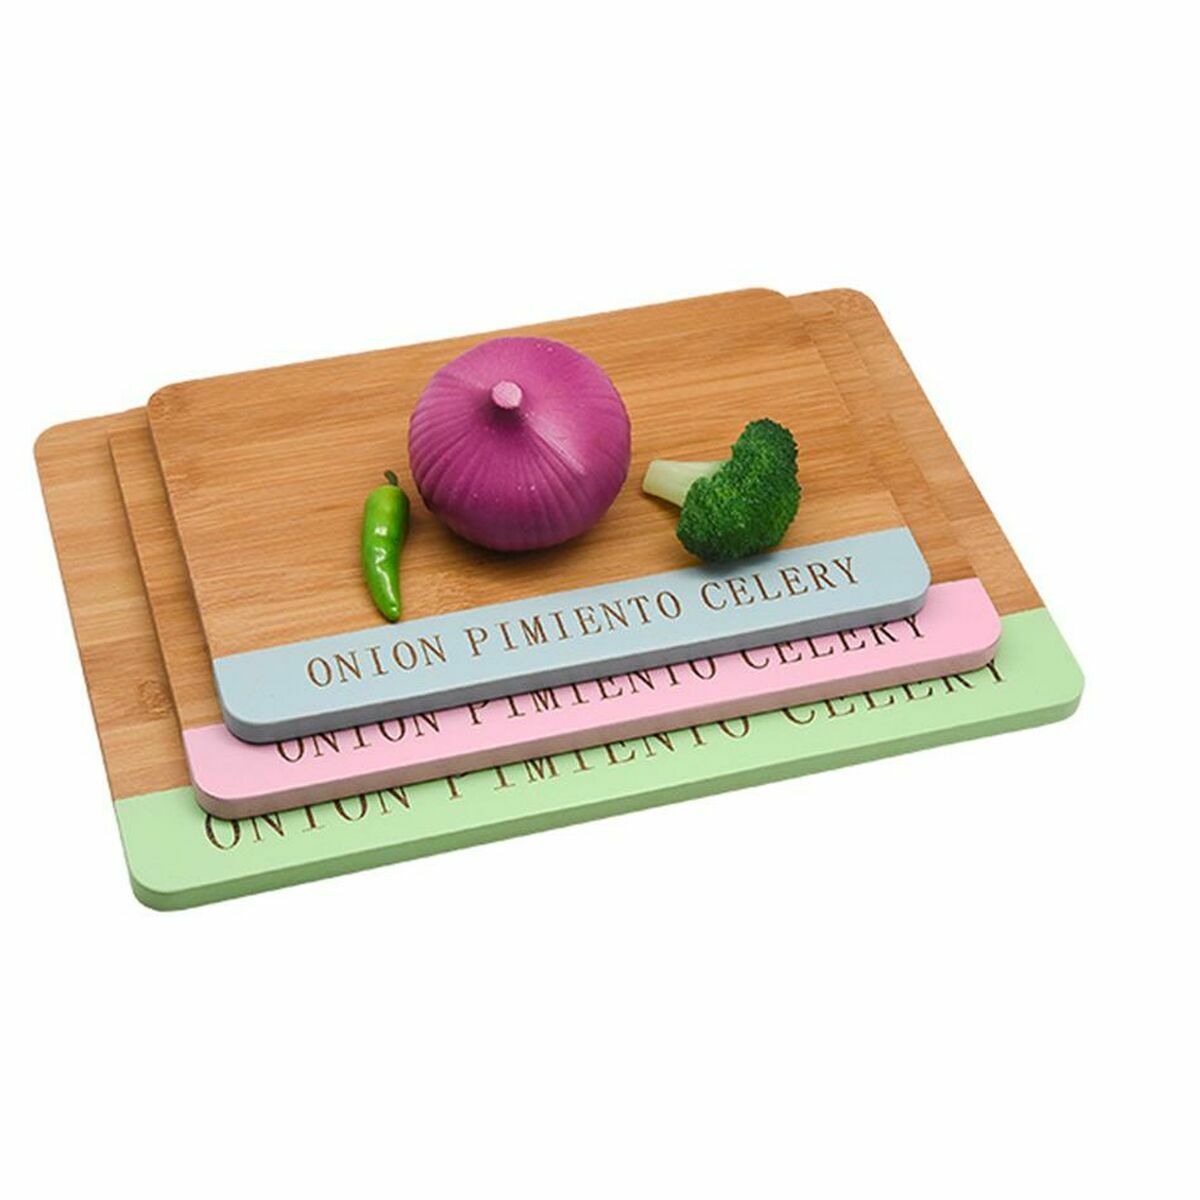 Cheeseboard DKD Home Decor 33,5 x 24 x 2 cm Blue Pink Stainless steel Green (3 Pieces)